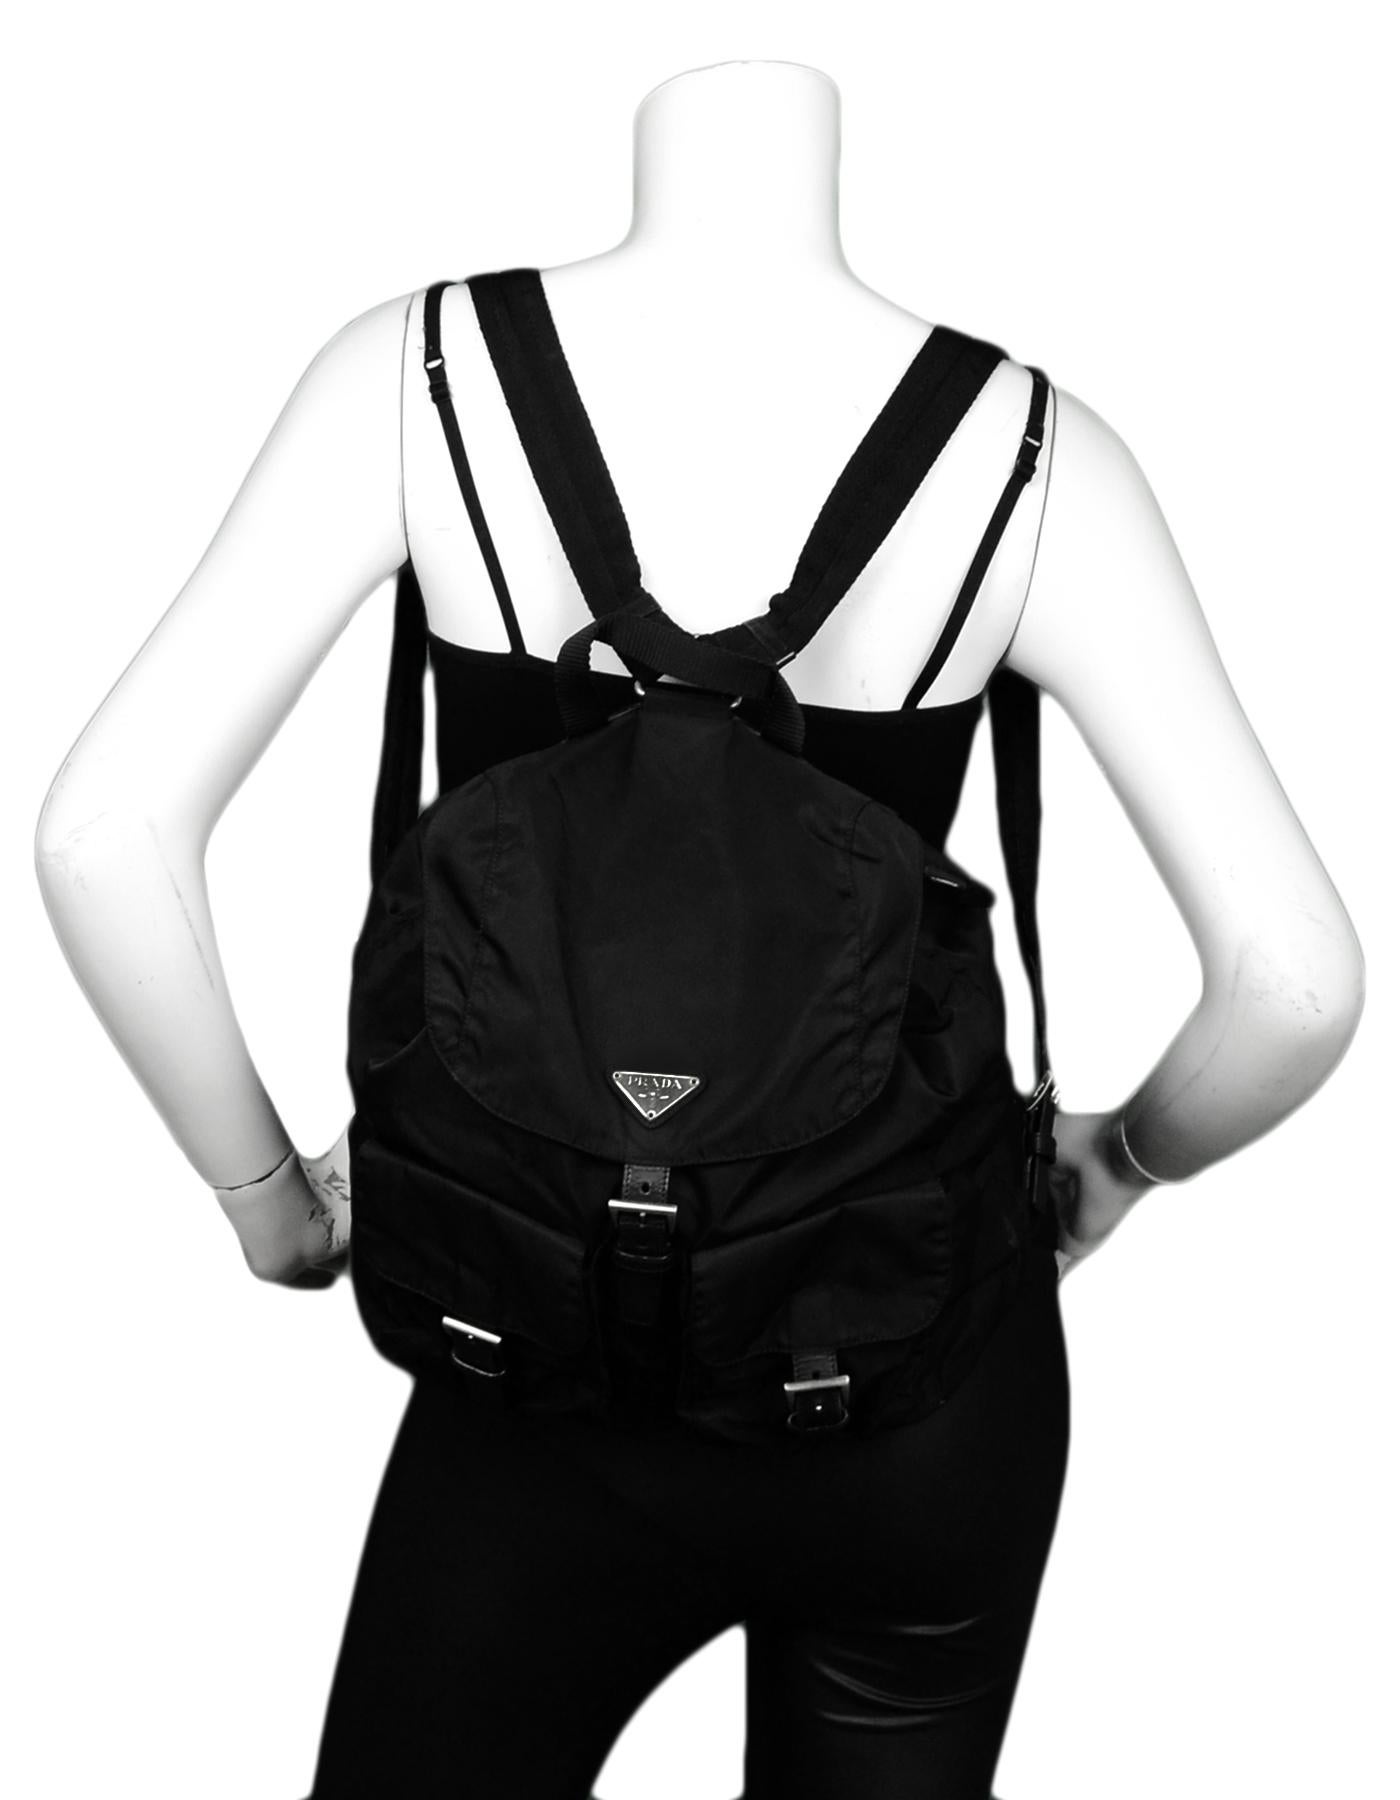 Prada Black Nylon Double Buckle Pocket Backpack Bag

Made In: Italy
Color: Black 
Hardware: Silvertone
Materials: Nylon with leather trim and canvas straps
Lining: Black logo textile 
Closure/Opening: Flap top with magnetic and buckle